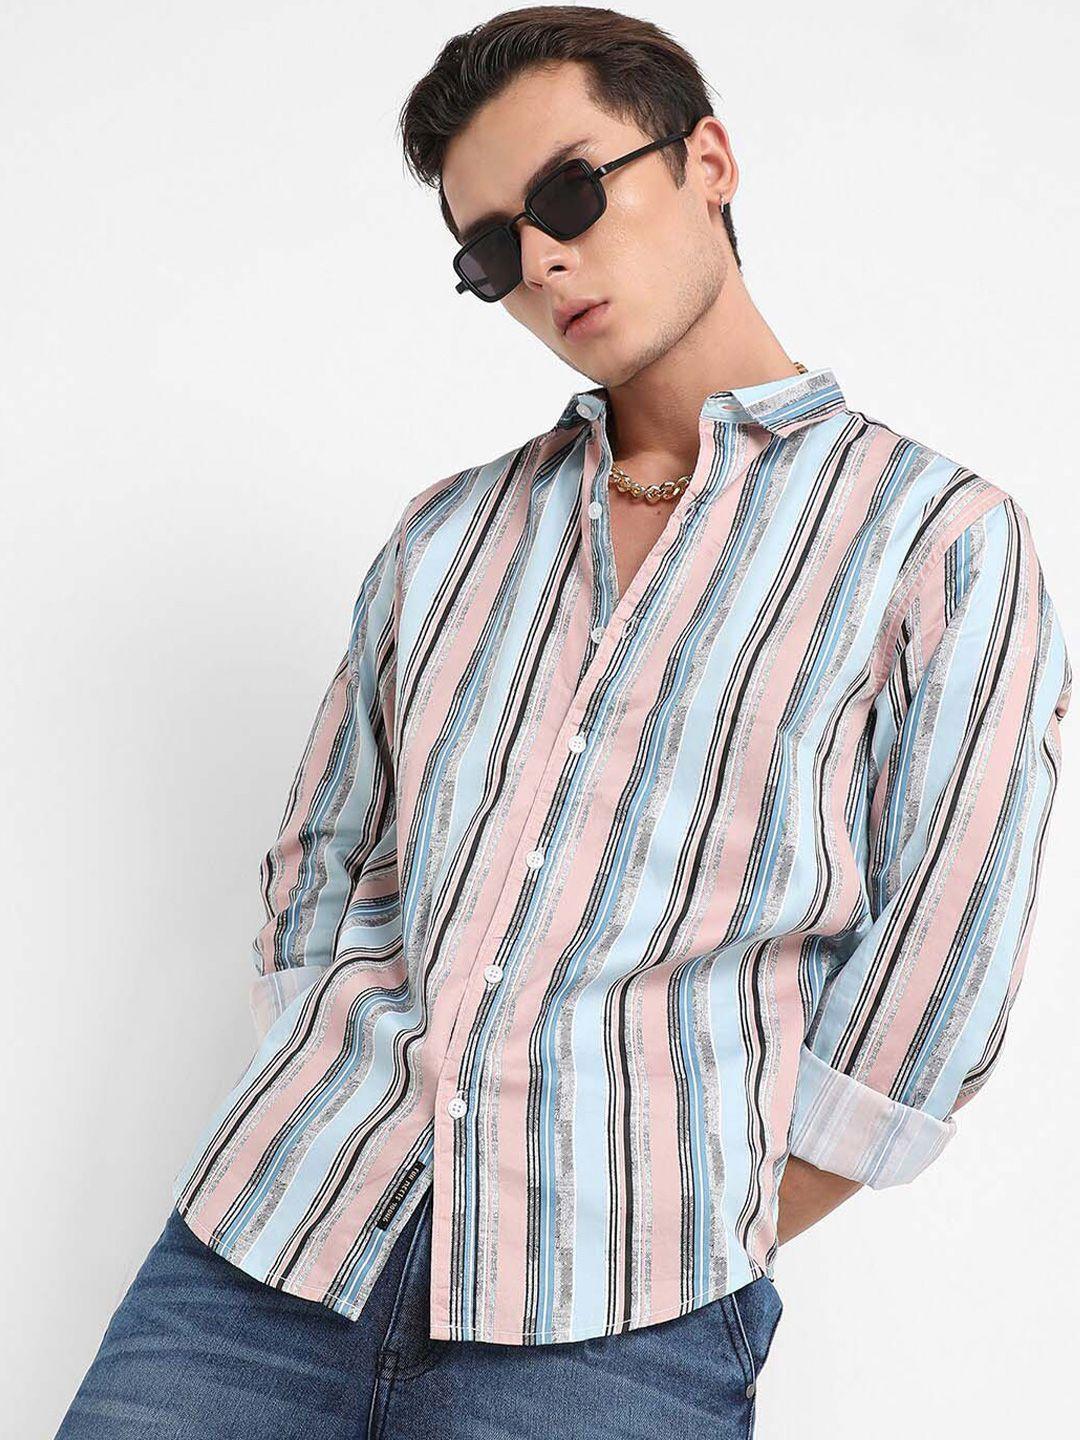 campus sutra vertical striped classic regular fit cotton casual shirt